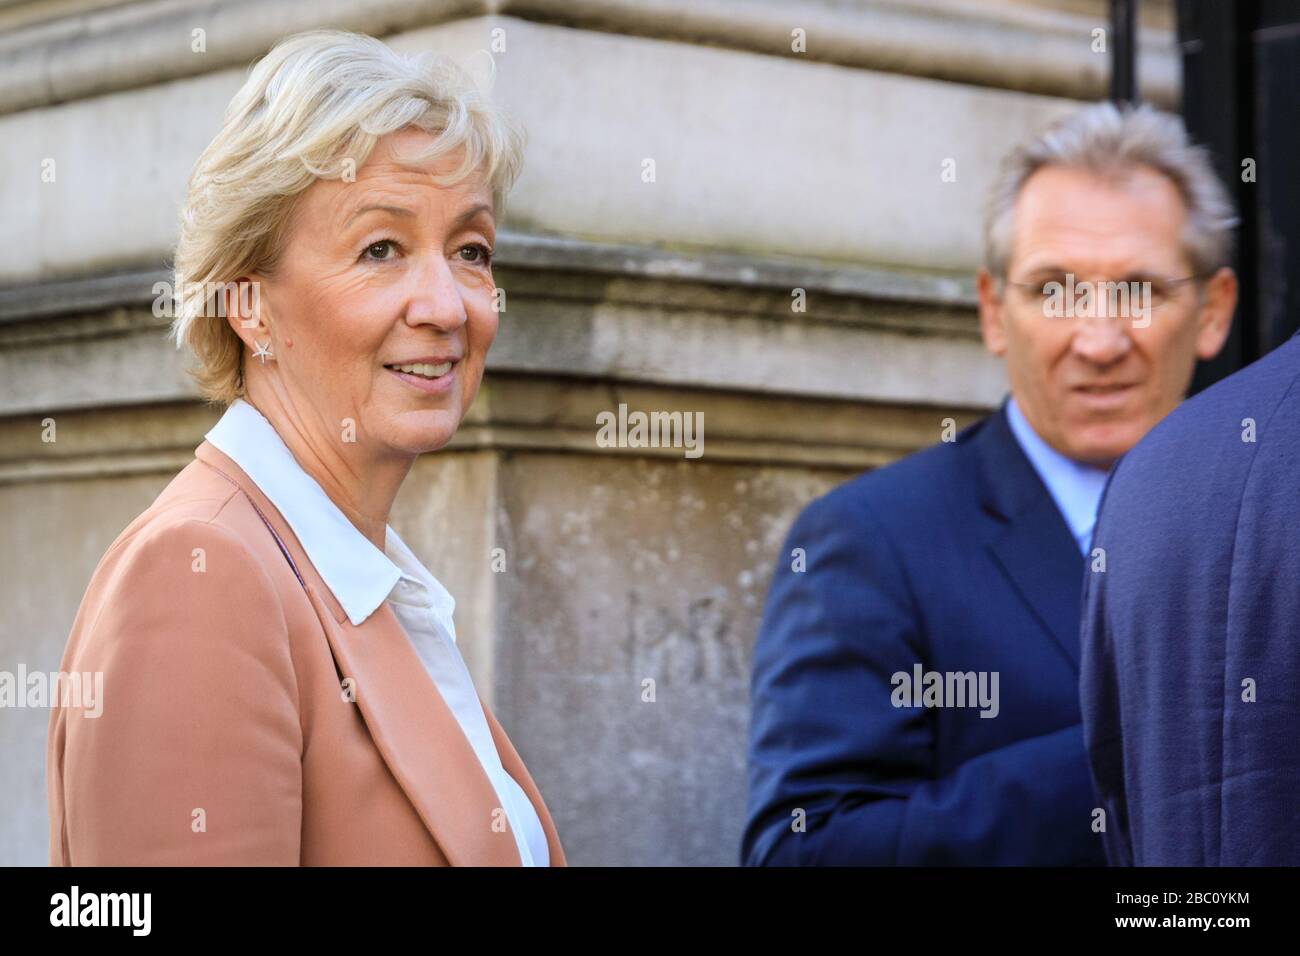 Andrea Leadsom, MP, Conservative politician, Leader of the House of Commons, enters Downing Street in Westminster, London Stock Photo